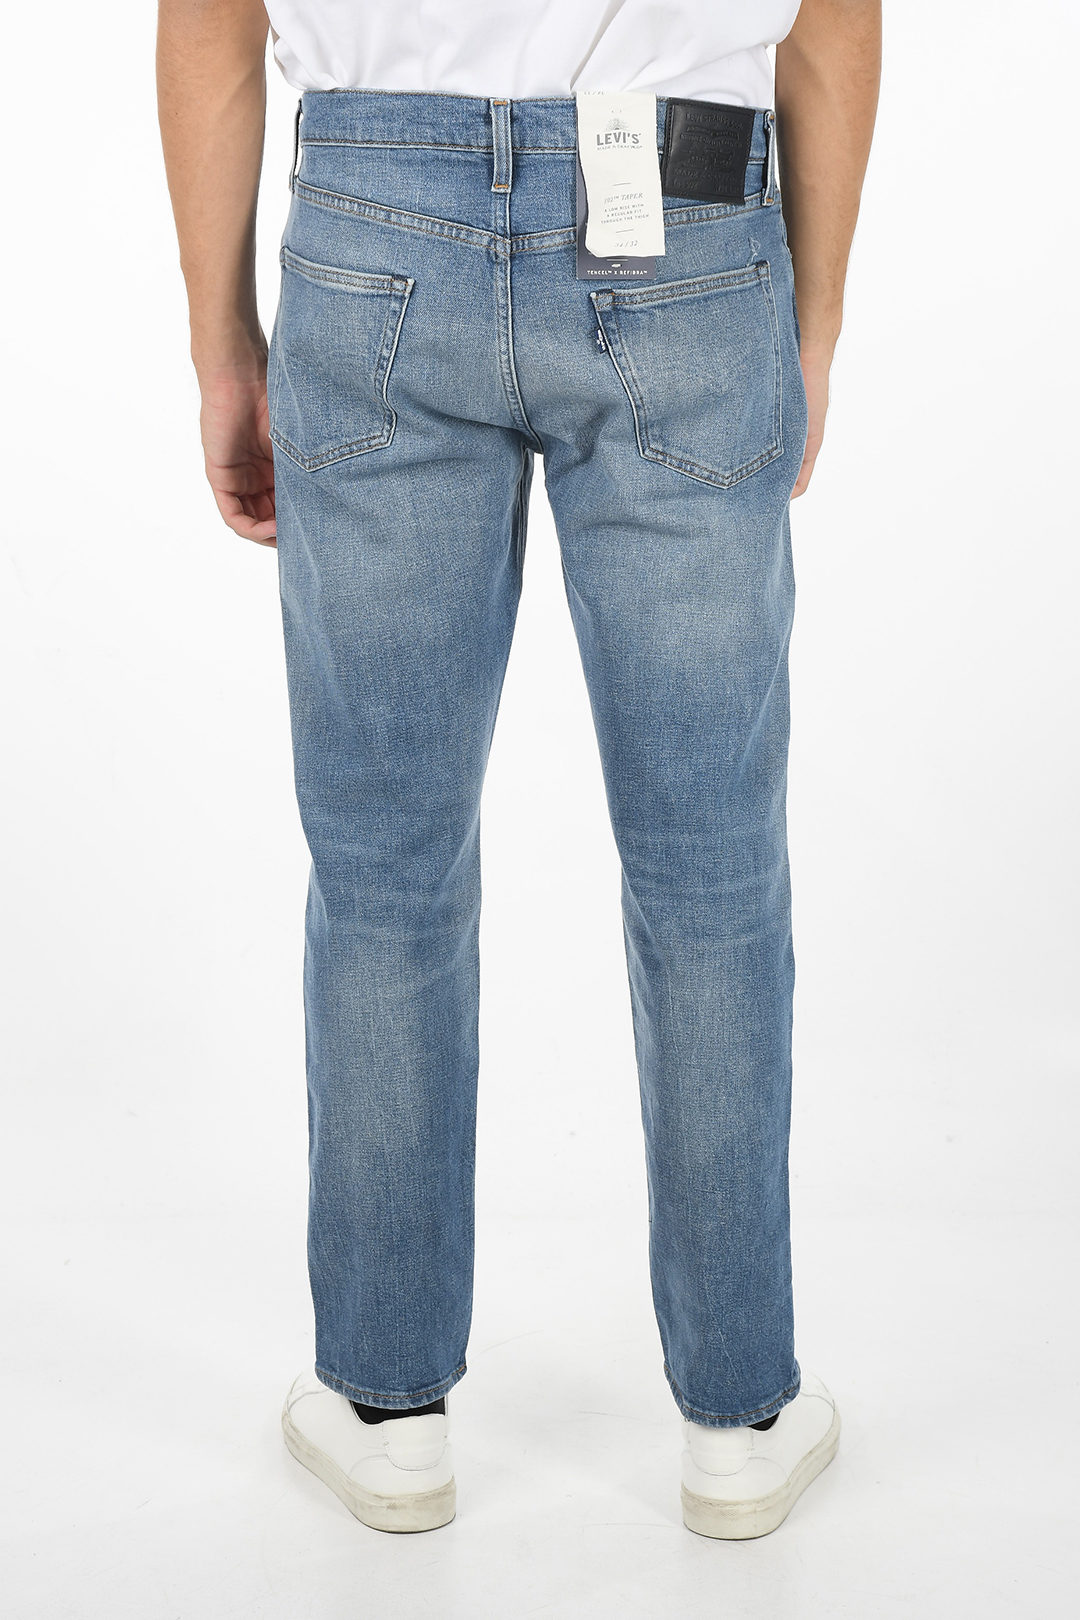 Levi's MADE & CRAFTED 18,5cm Low Rise Regular Fit 502 Jeans L32 men -  Glamood Outlet